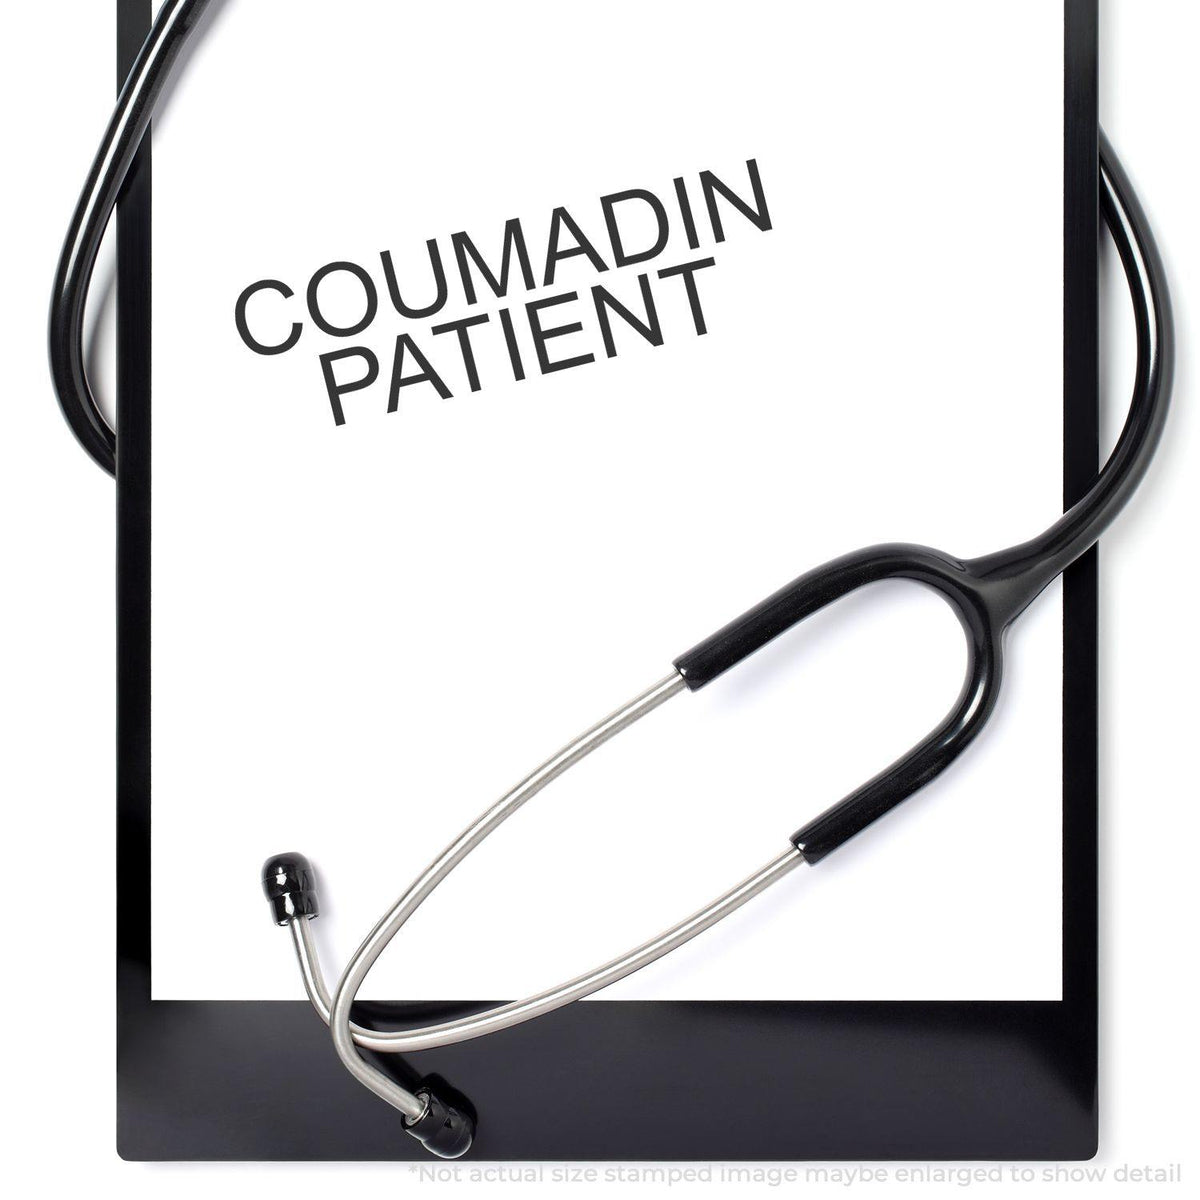 Coumadin Patient Rubber Stamp In Use Photo